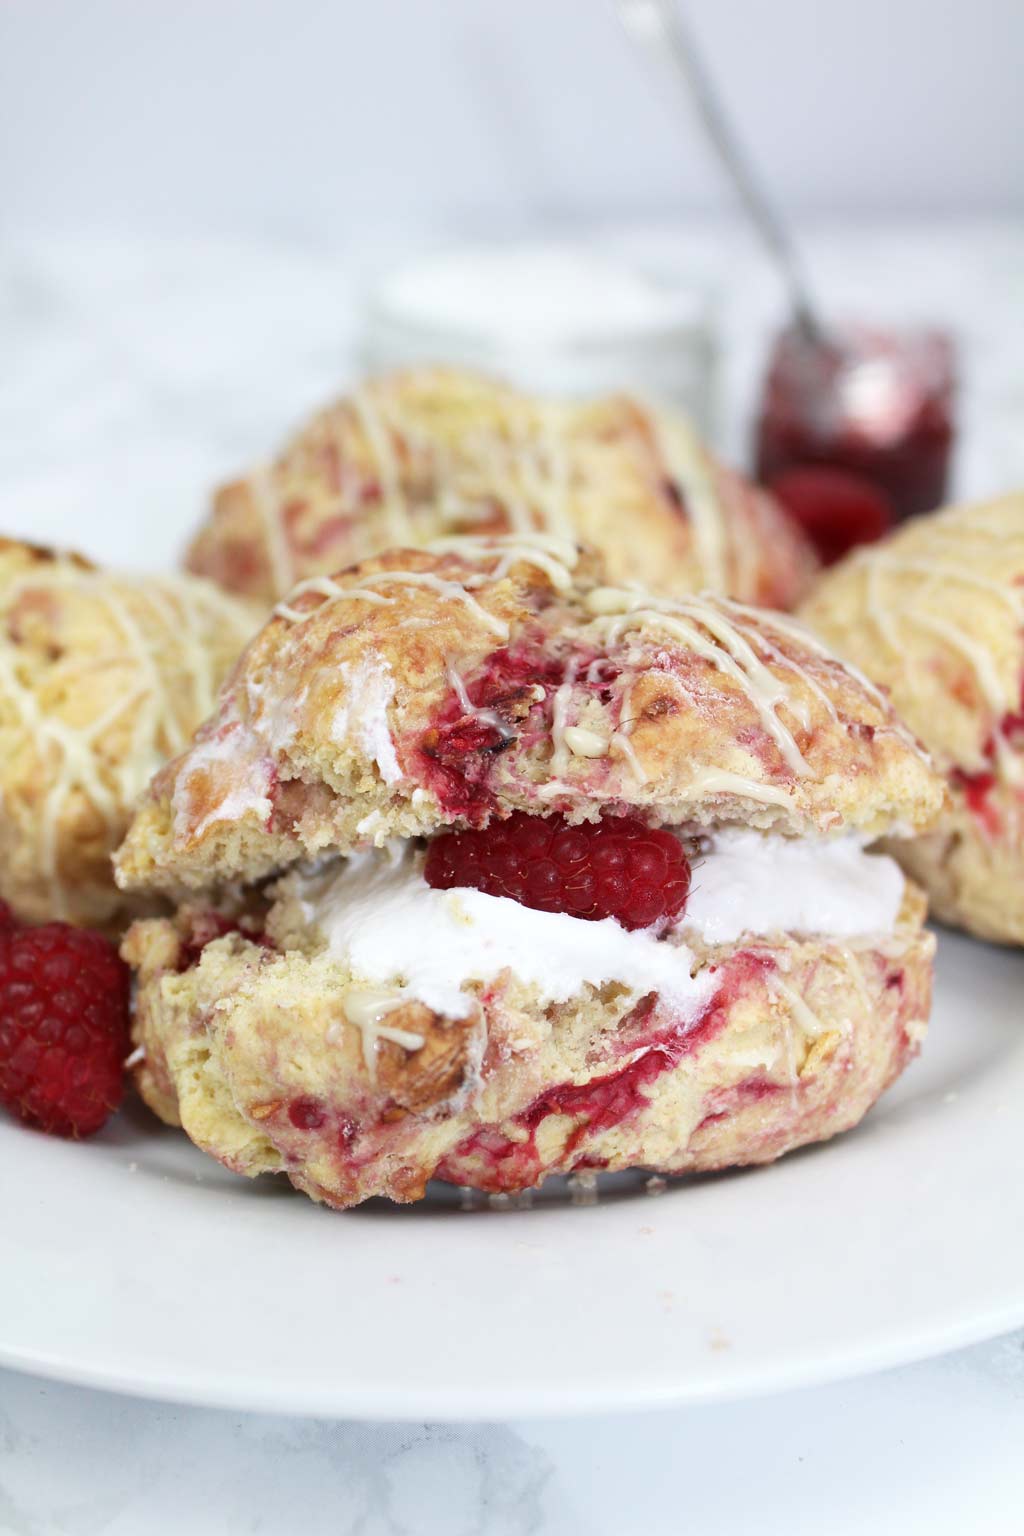 Raspberry white chocolate scone on a plate with whipped cream in the middle